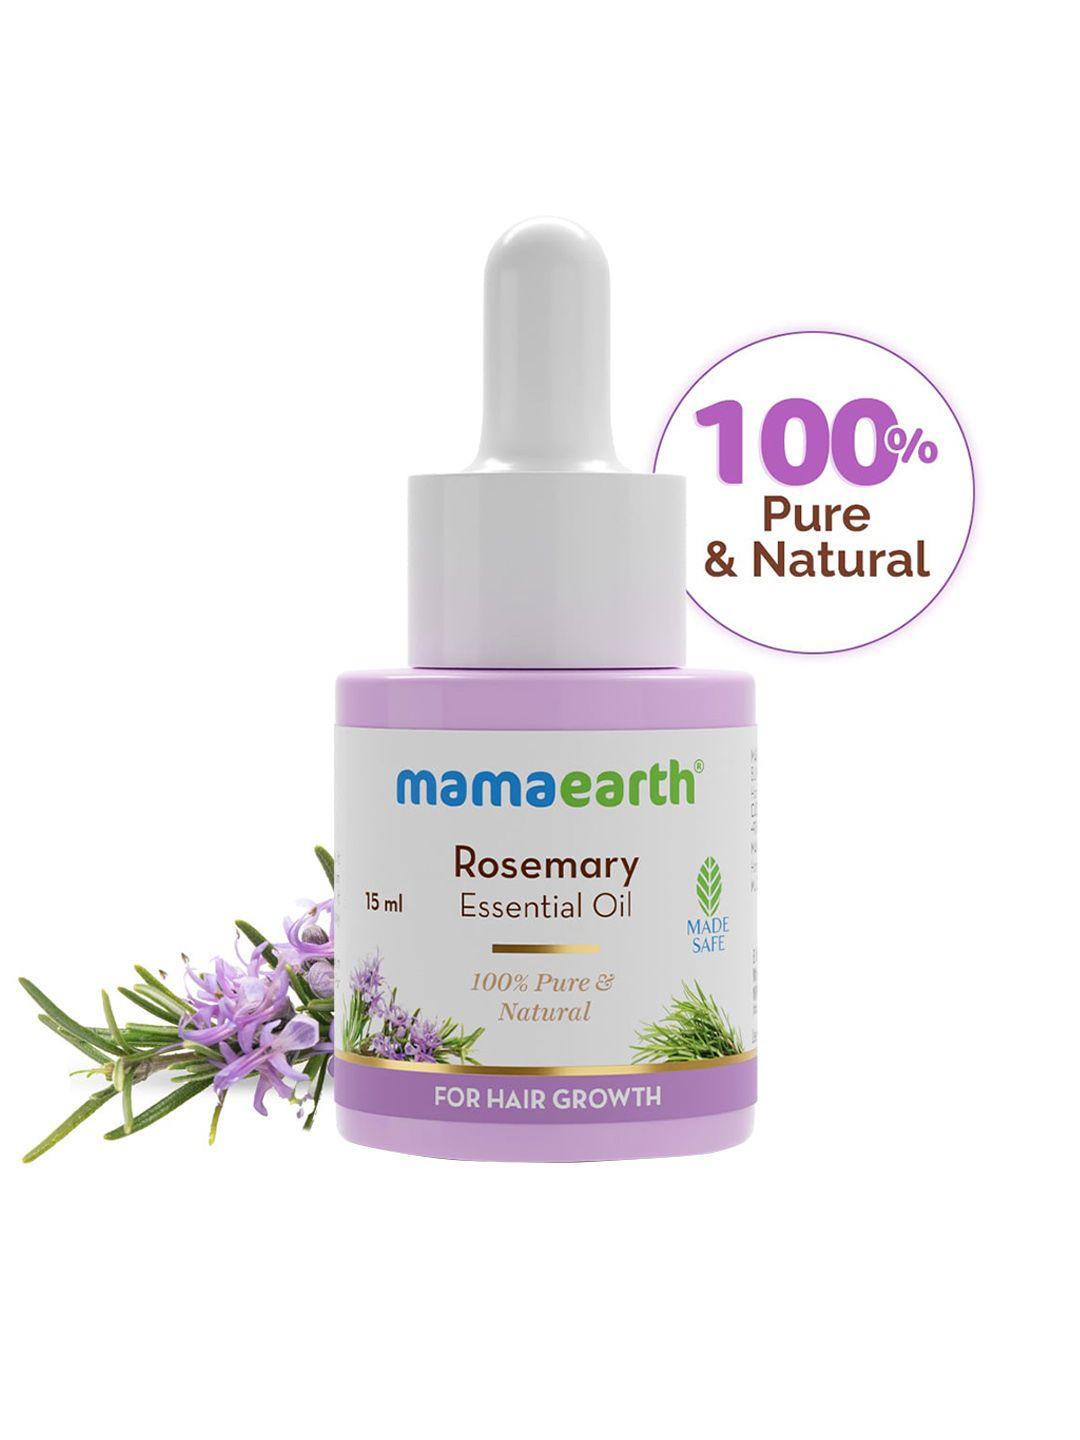 mamaearth-rosemary-essential-oil-for-hair-growth---15-ml